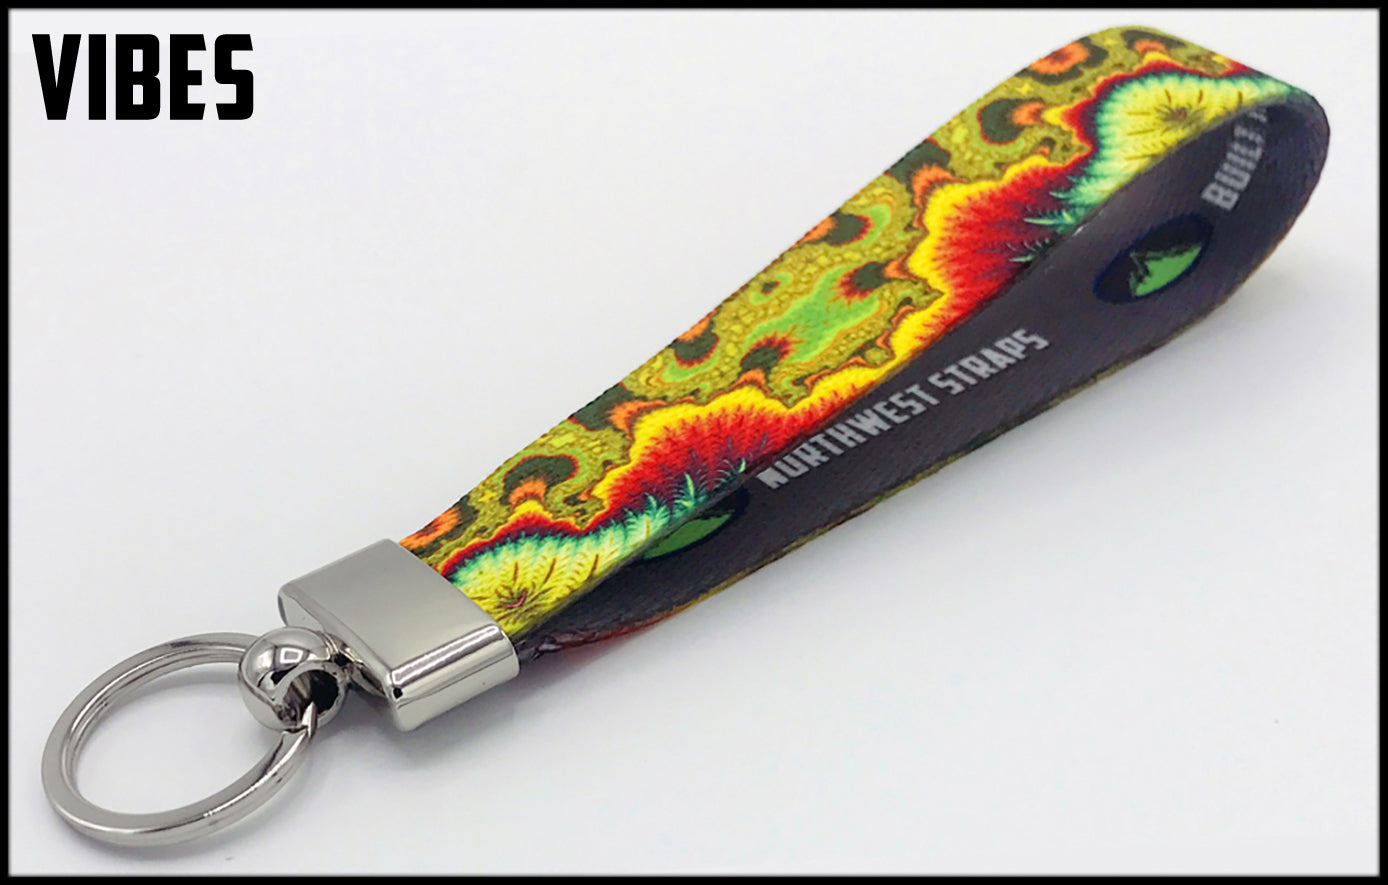 red yellow green black trippy. 1 inch custom picture quality polyester webbing keyfob. Design by Northwest Straps.